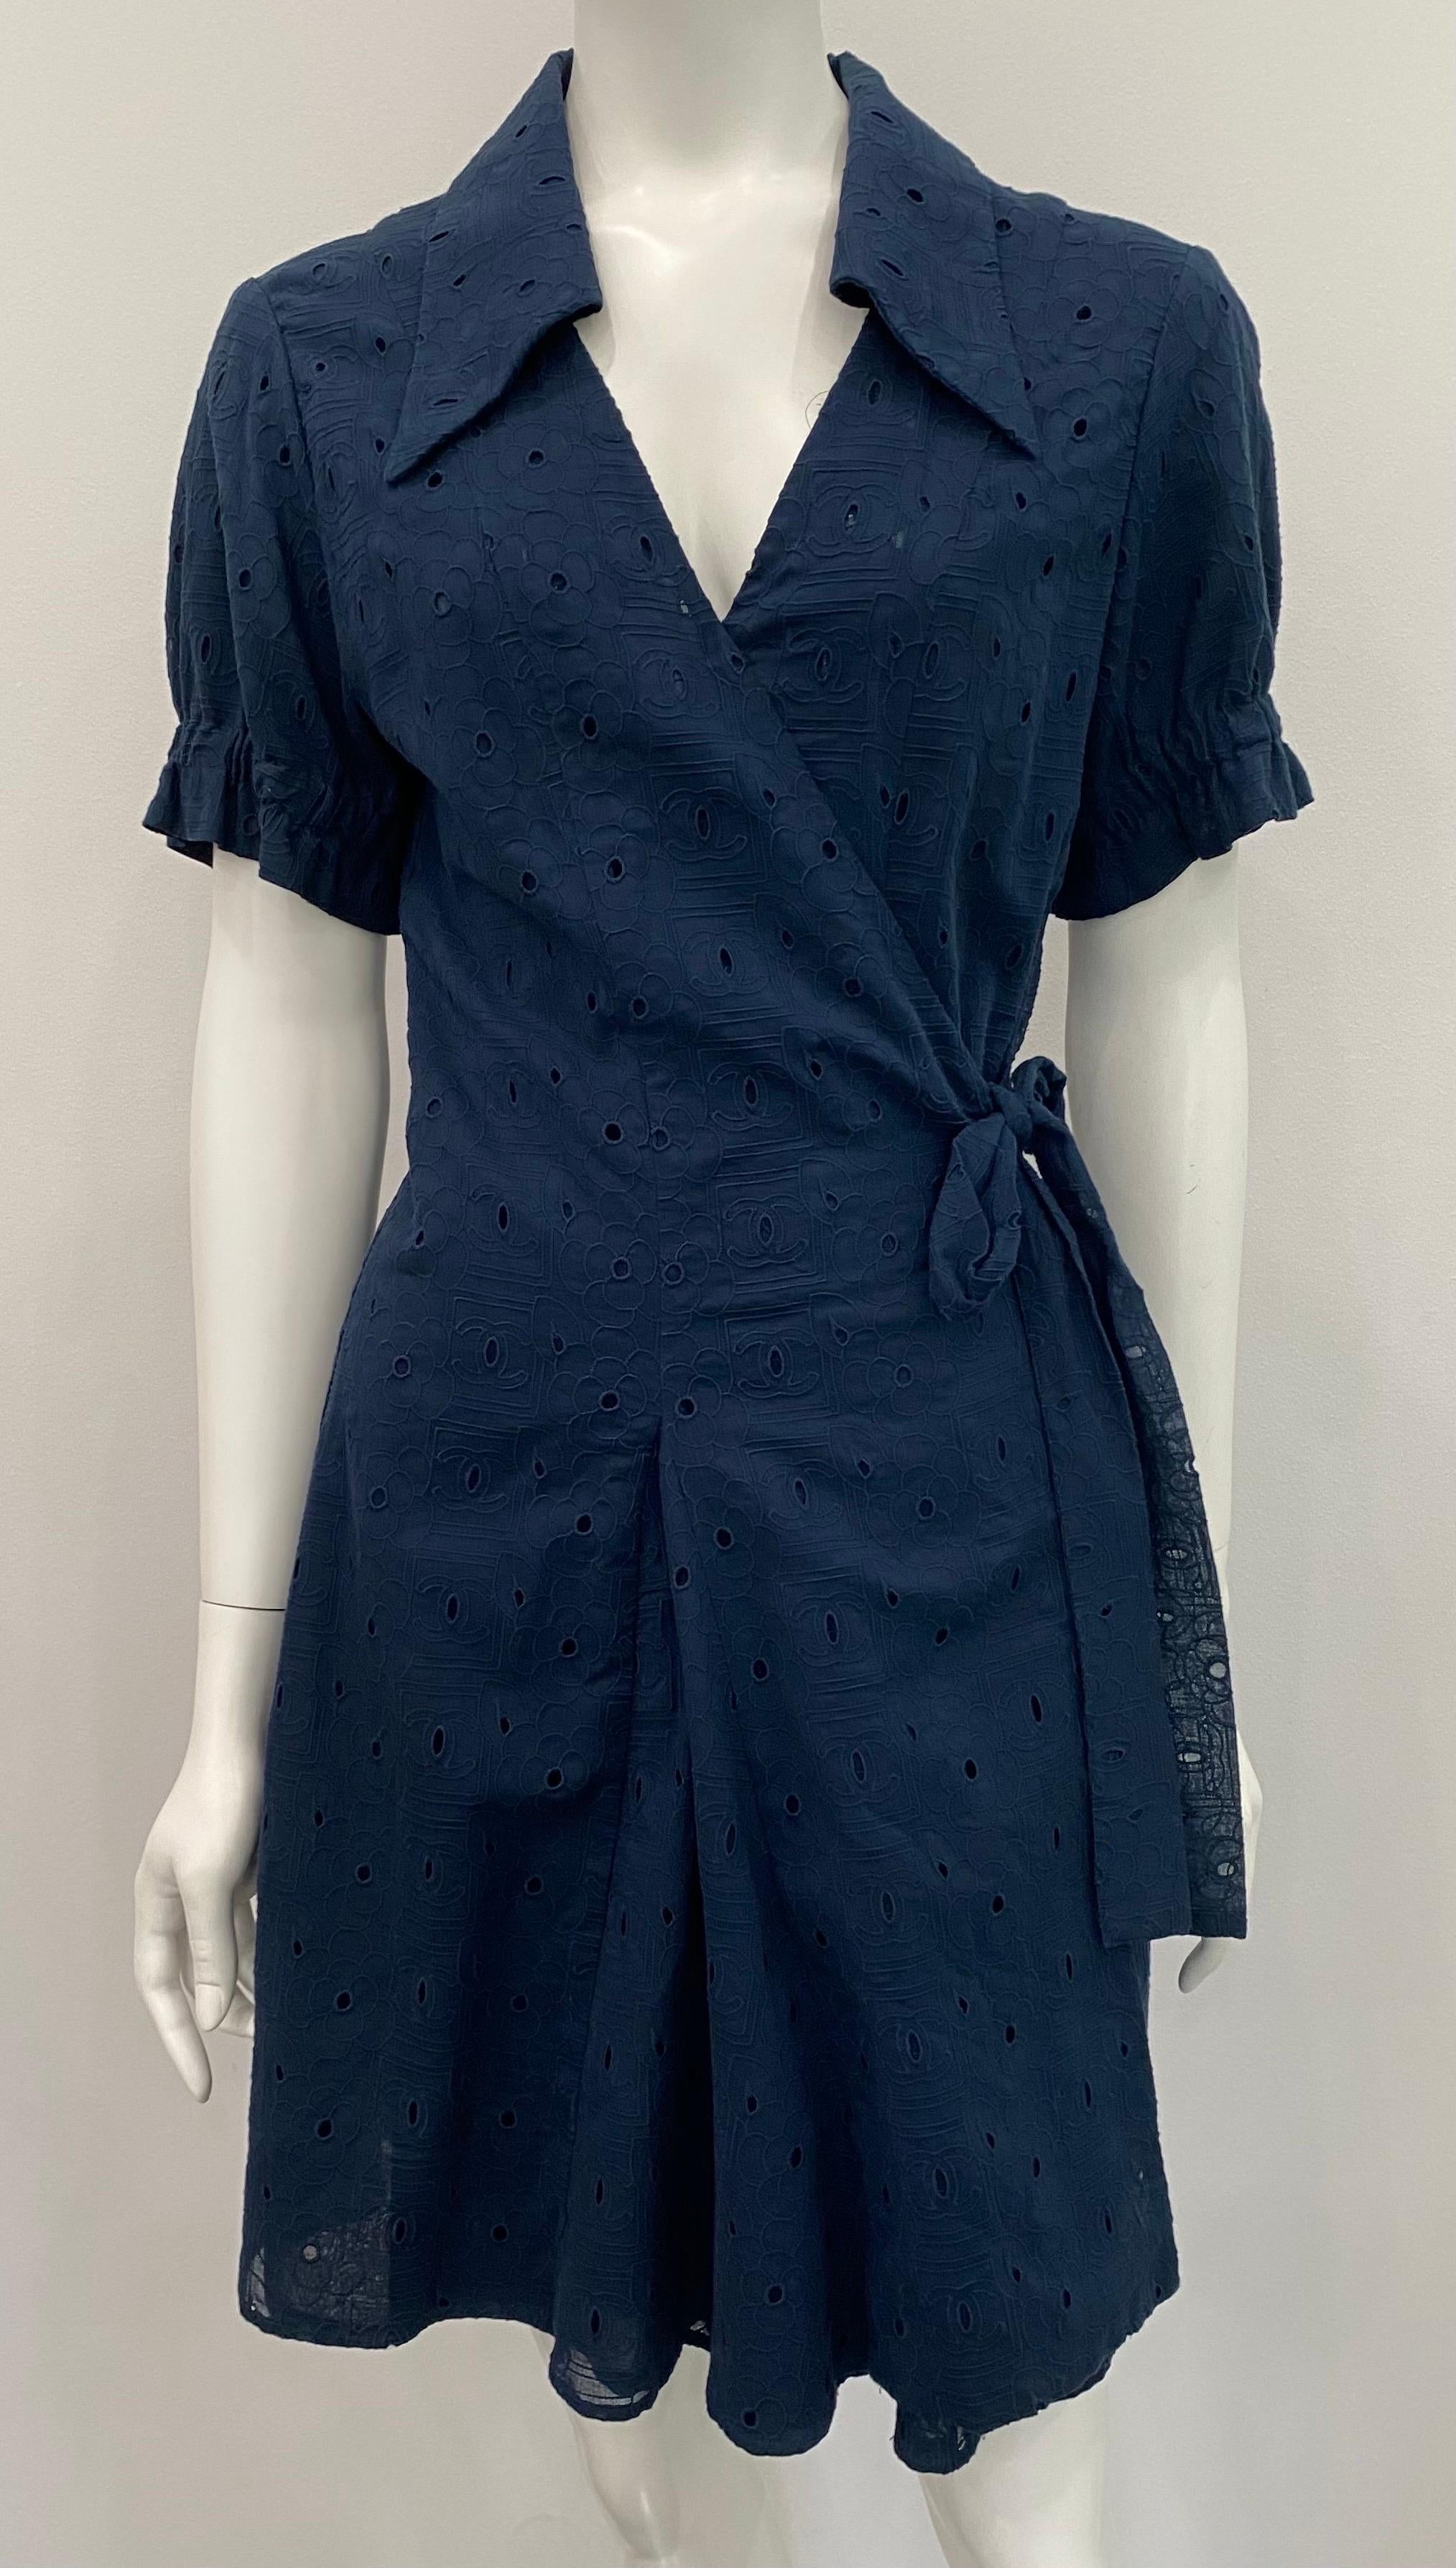 Chanel Navy Cotton Eyelet Wrap Dress - Sz 42 - 07P Chanel ID Collection. This perfect Chanel navy eyelet summer dress is lined in cotton, the wrap dress has short sleeves with an elastic detail creating a slight ruffle illusion to the sleeve, it has